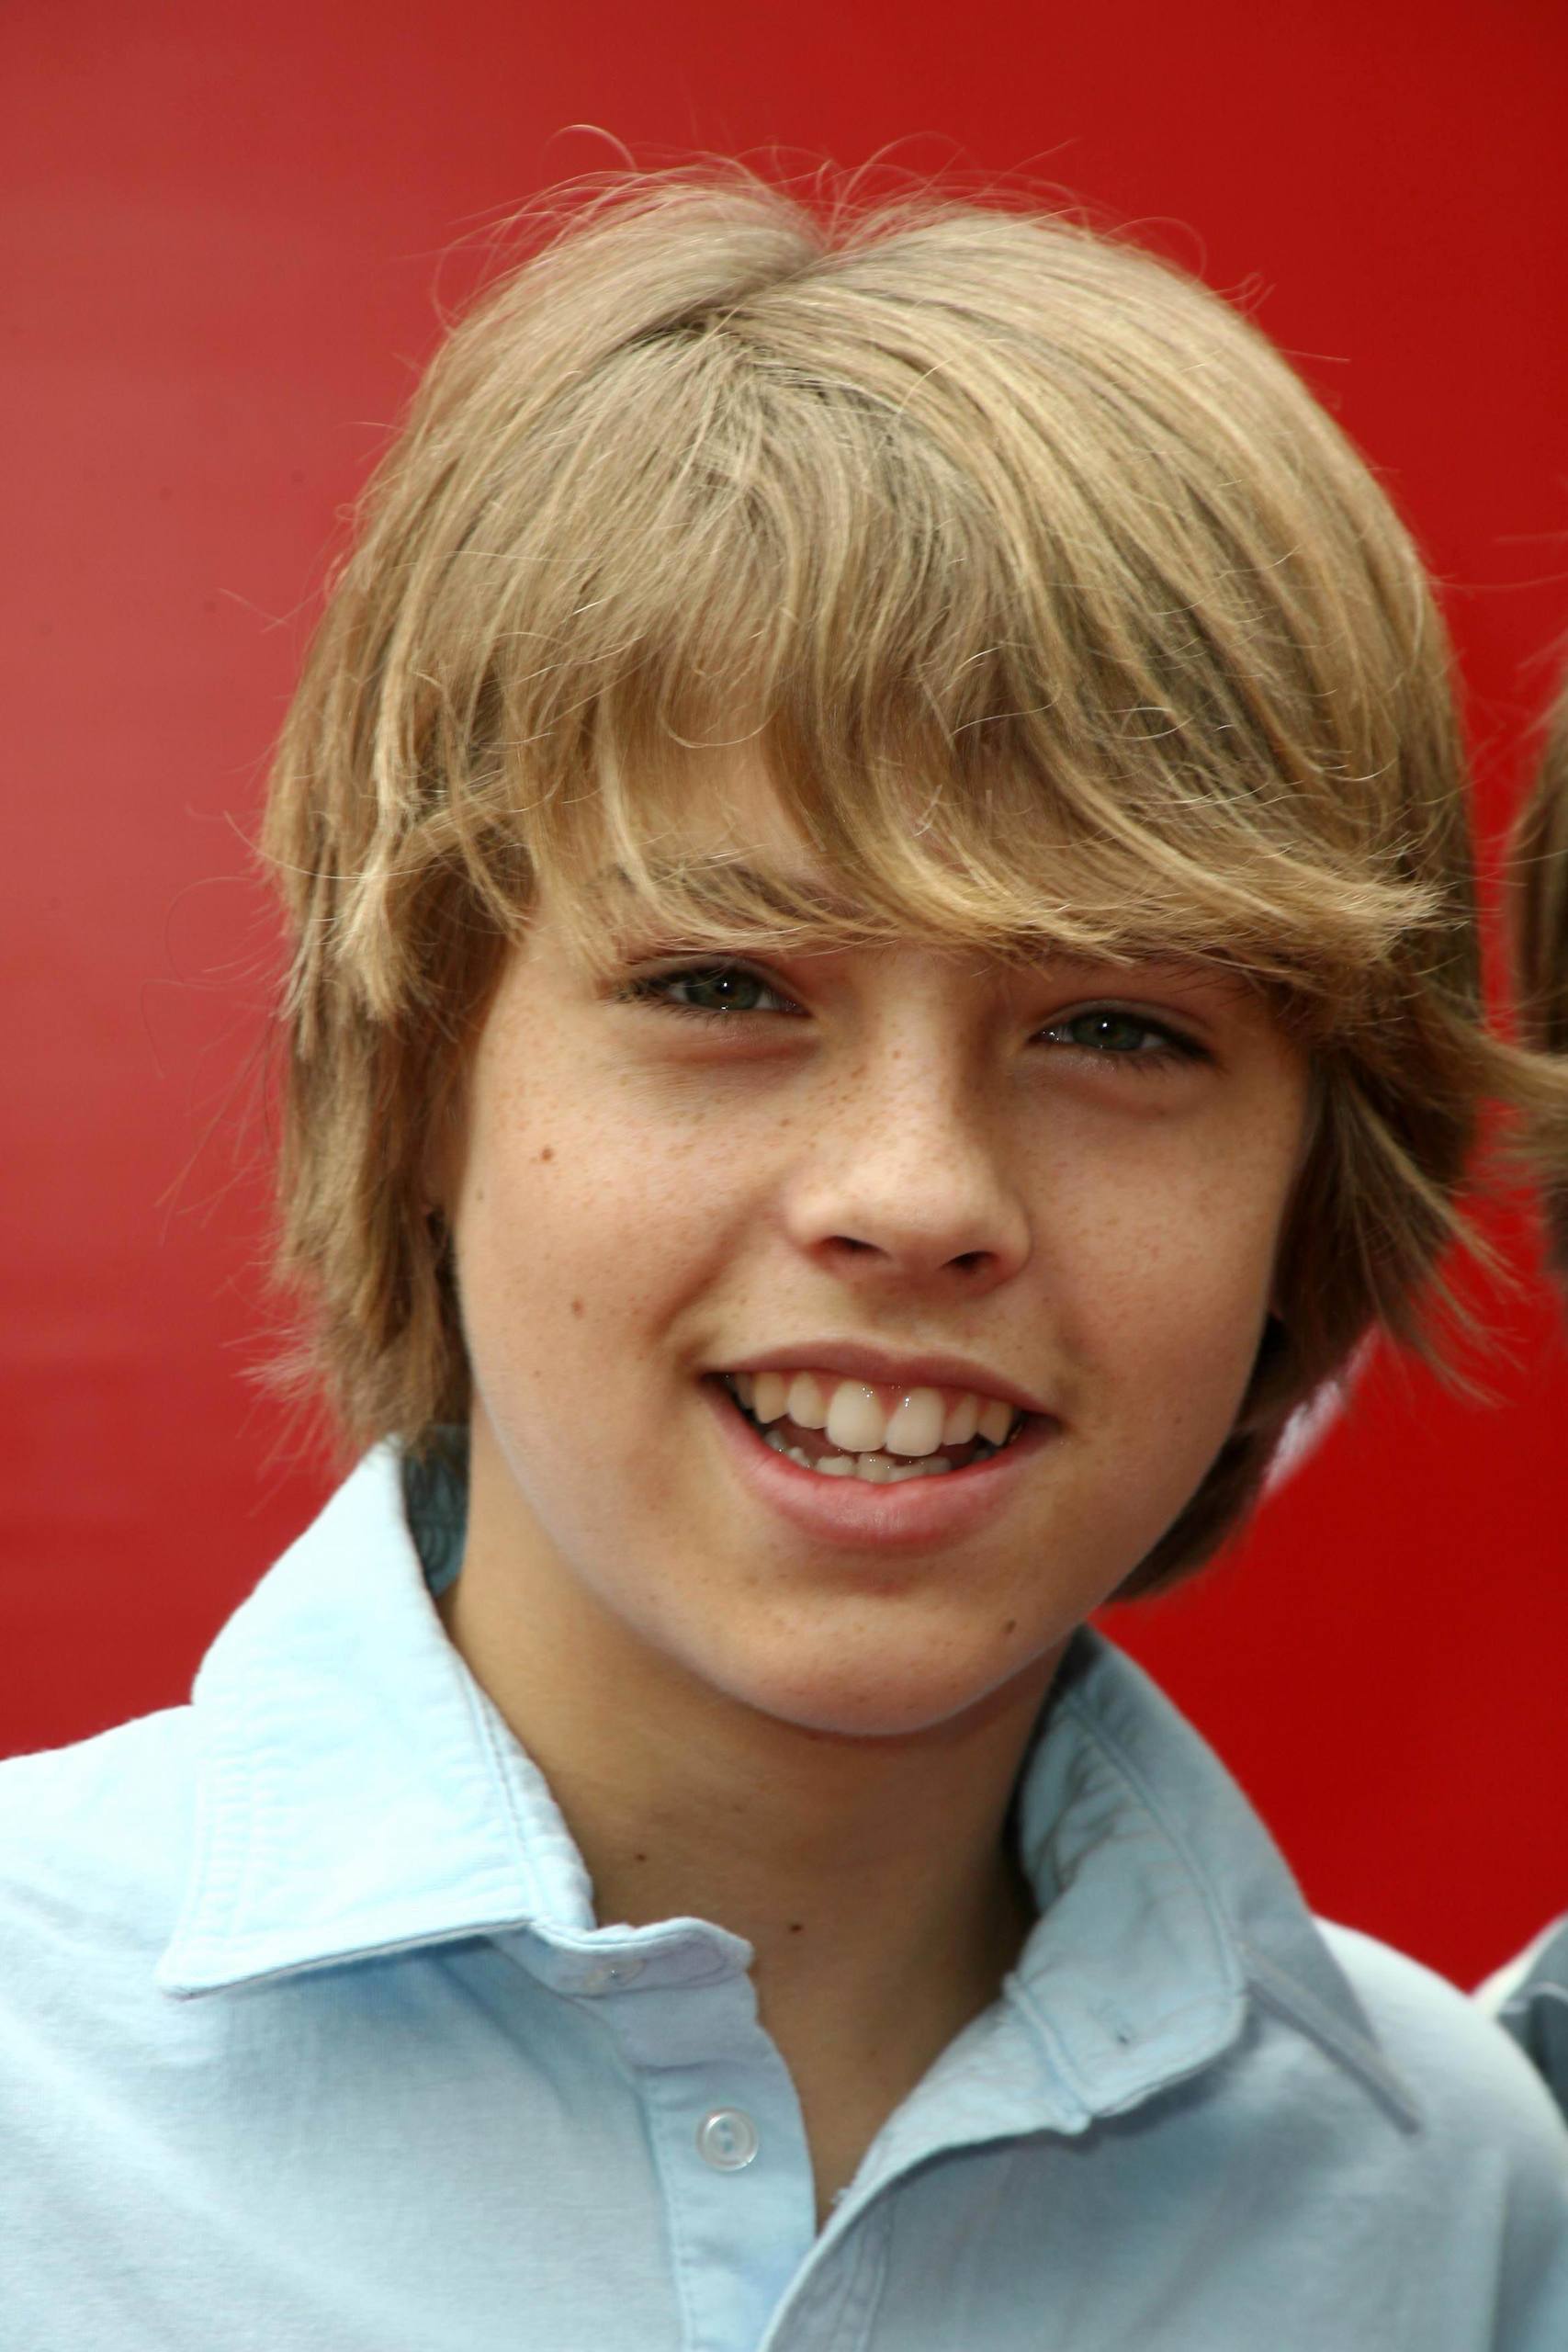 Dylan-Cole-Sprouse-Variety-s-Power-of-Youth-04-Oct-2008-the-sprouse-brothers-30980616-1707-2560.jpg